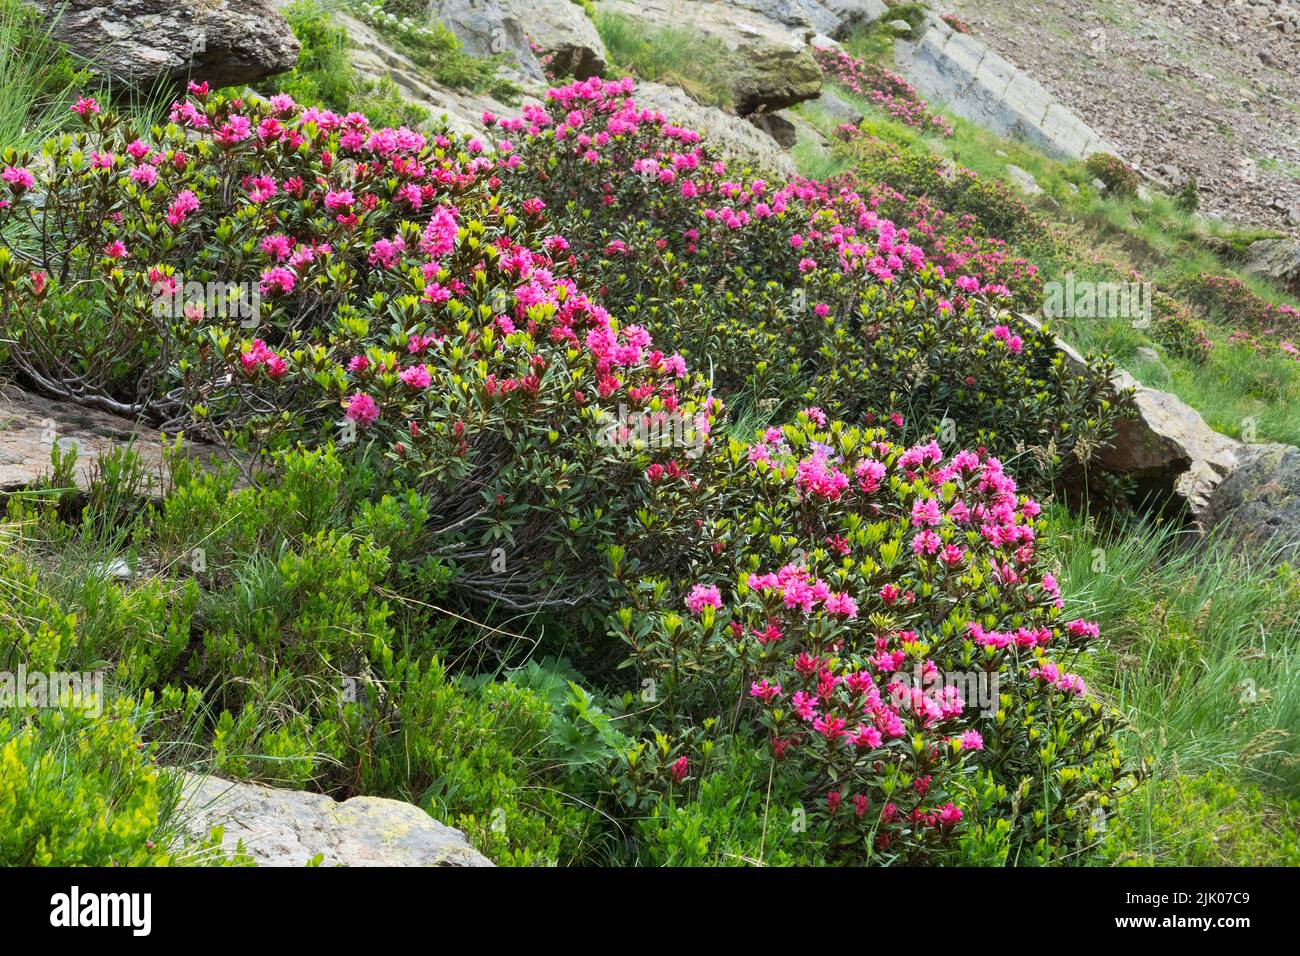 Alpenroses, shrubs with pinkish-red flowers, in spring on mountainside Stock Photo